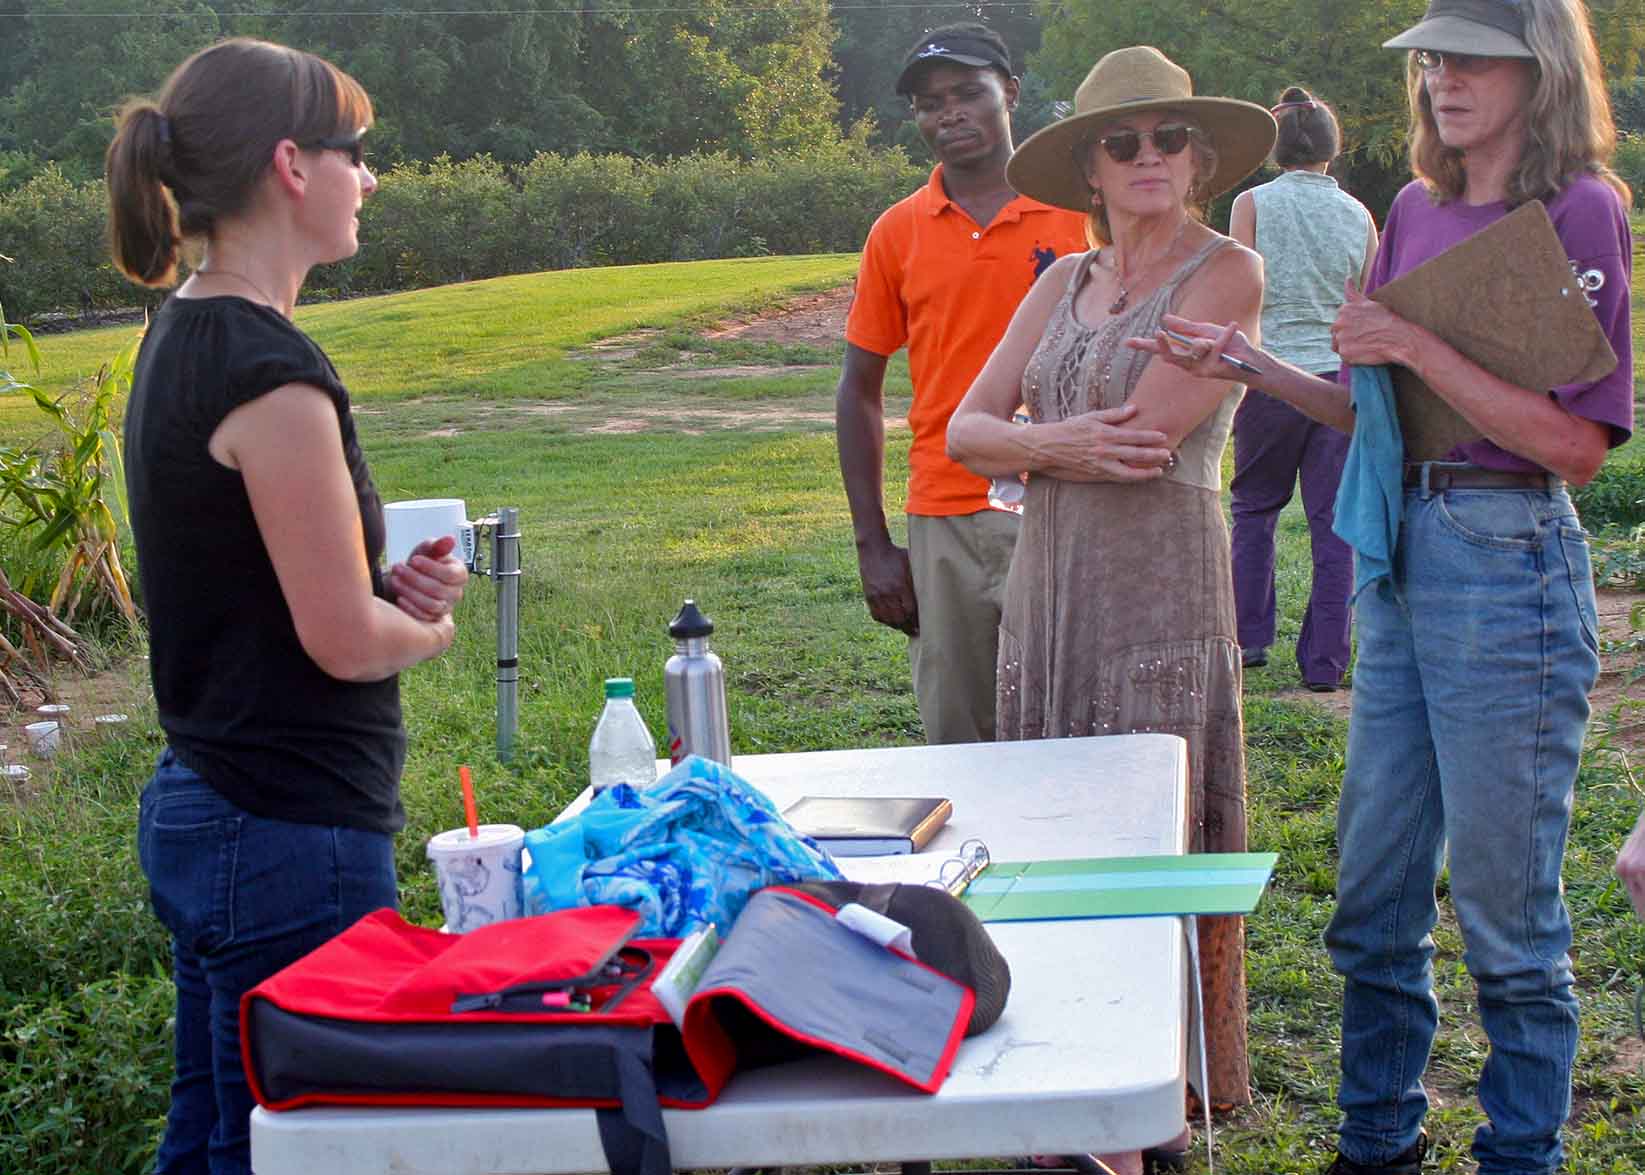 Attendees discuss growing practices at the University of Georgia's organic research farm in Watkinsville during the 2012 Organic Twilight Tour.